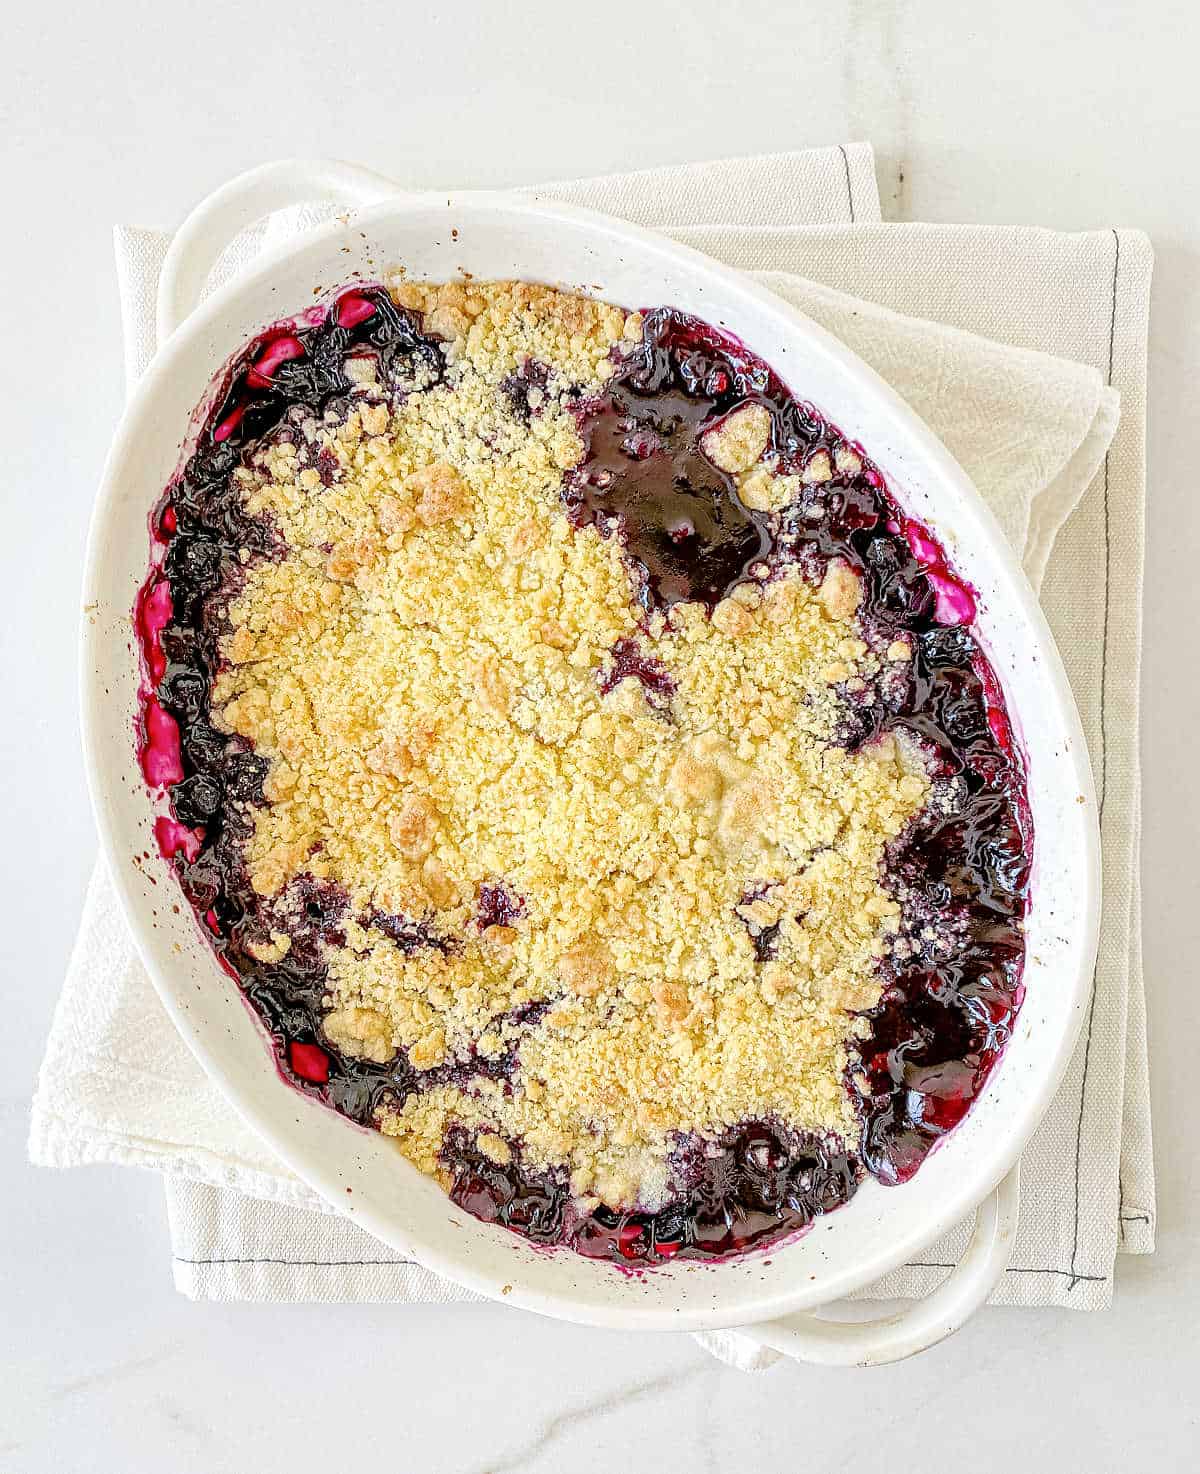 Top view of baked blueberry crumble in oval white dish on white surface